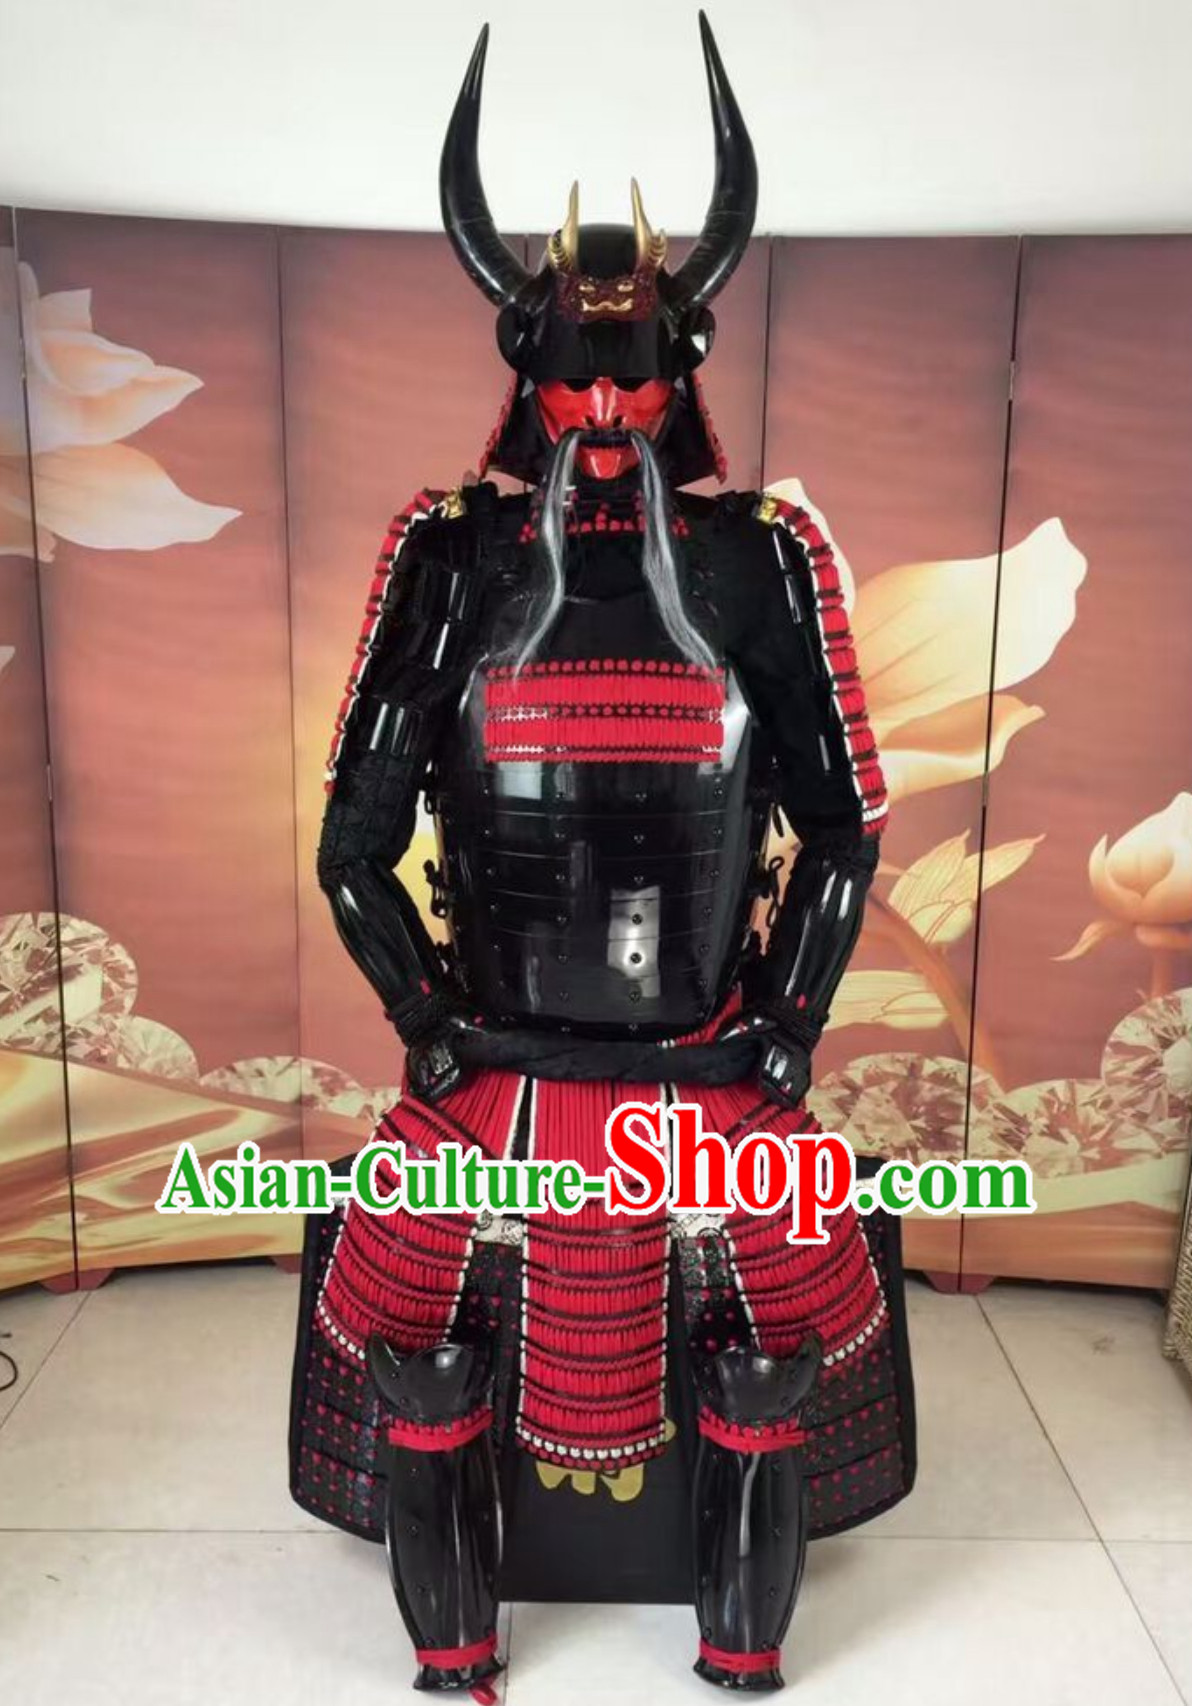 Ancient Authentic Japanese Samurai Armor Japanese Samurai Body Armor Custom Japanese Samurai Armor Mask and Body Armors Complete Set